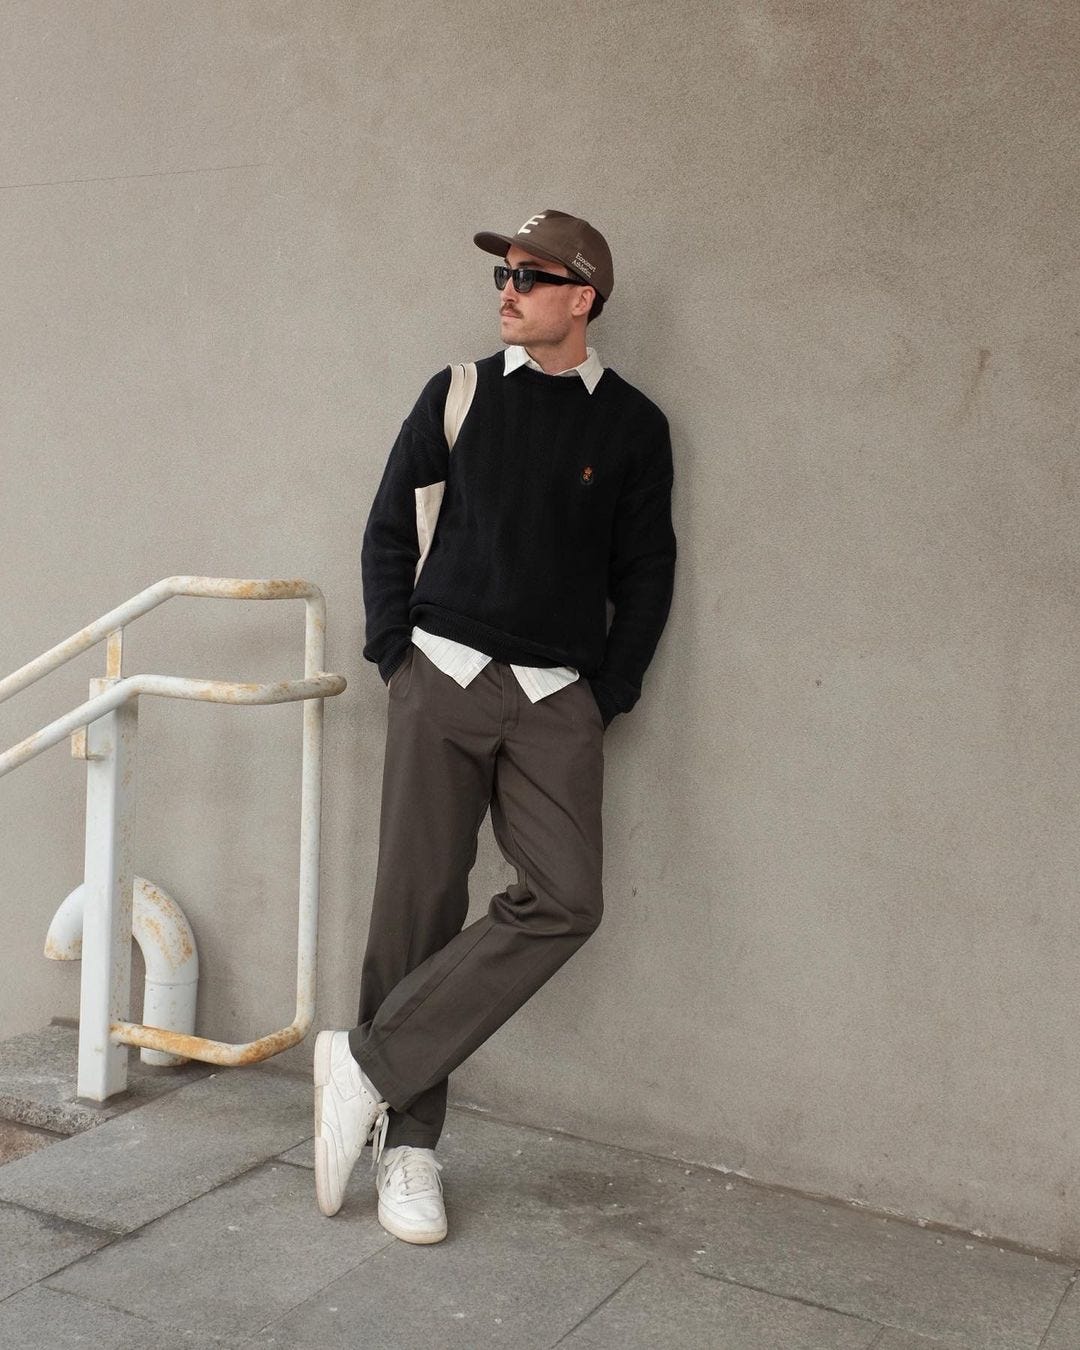 man leaning against a wall wearing sunglasses, a black sweater, dark pants, and white sneakers